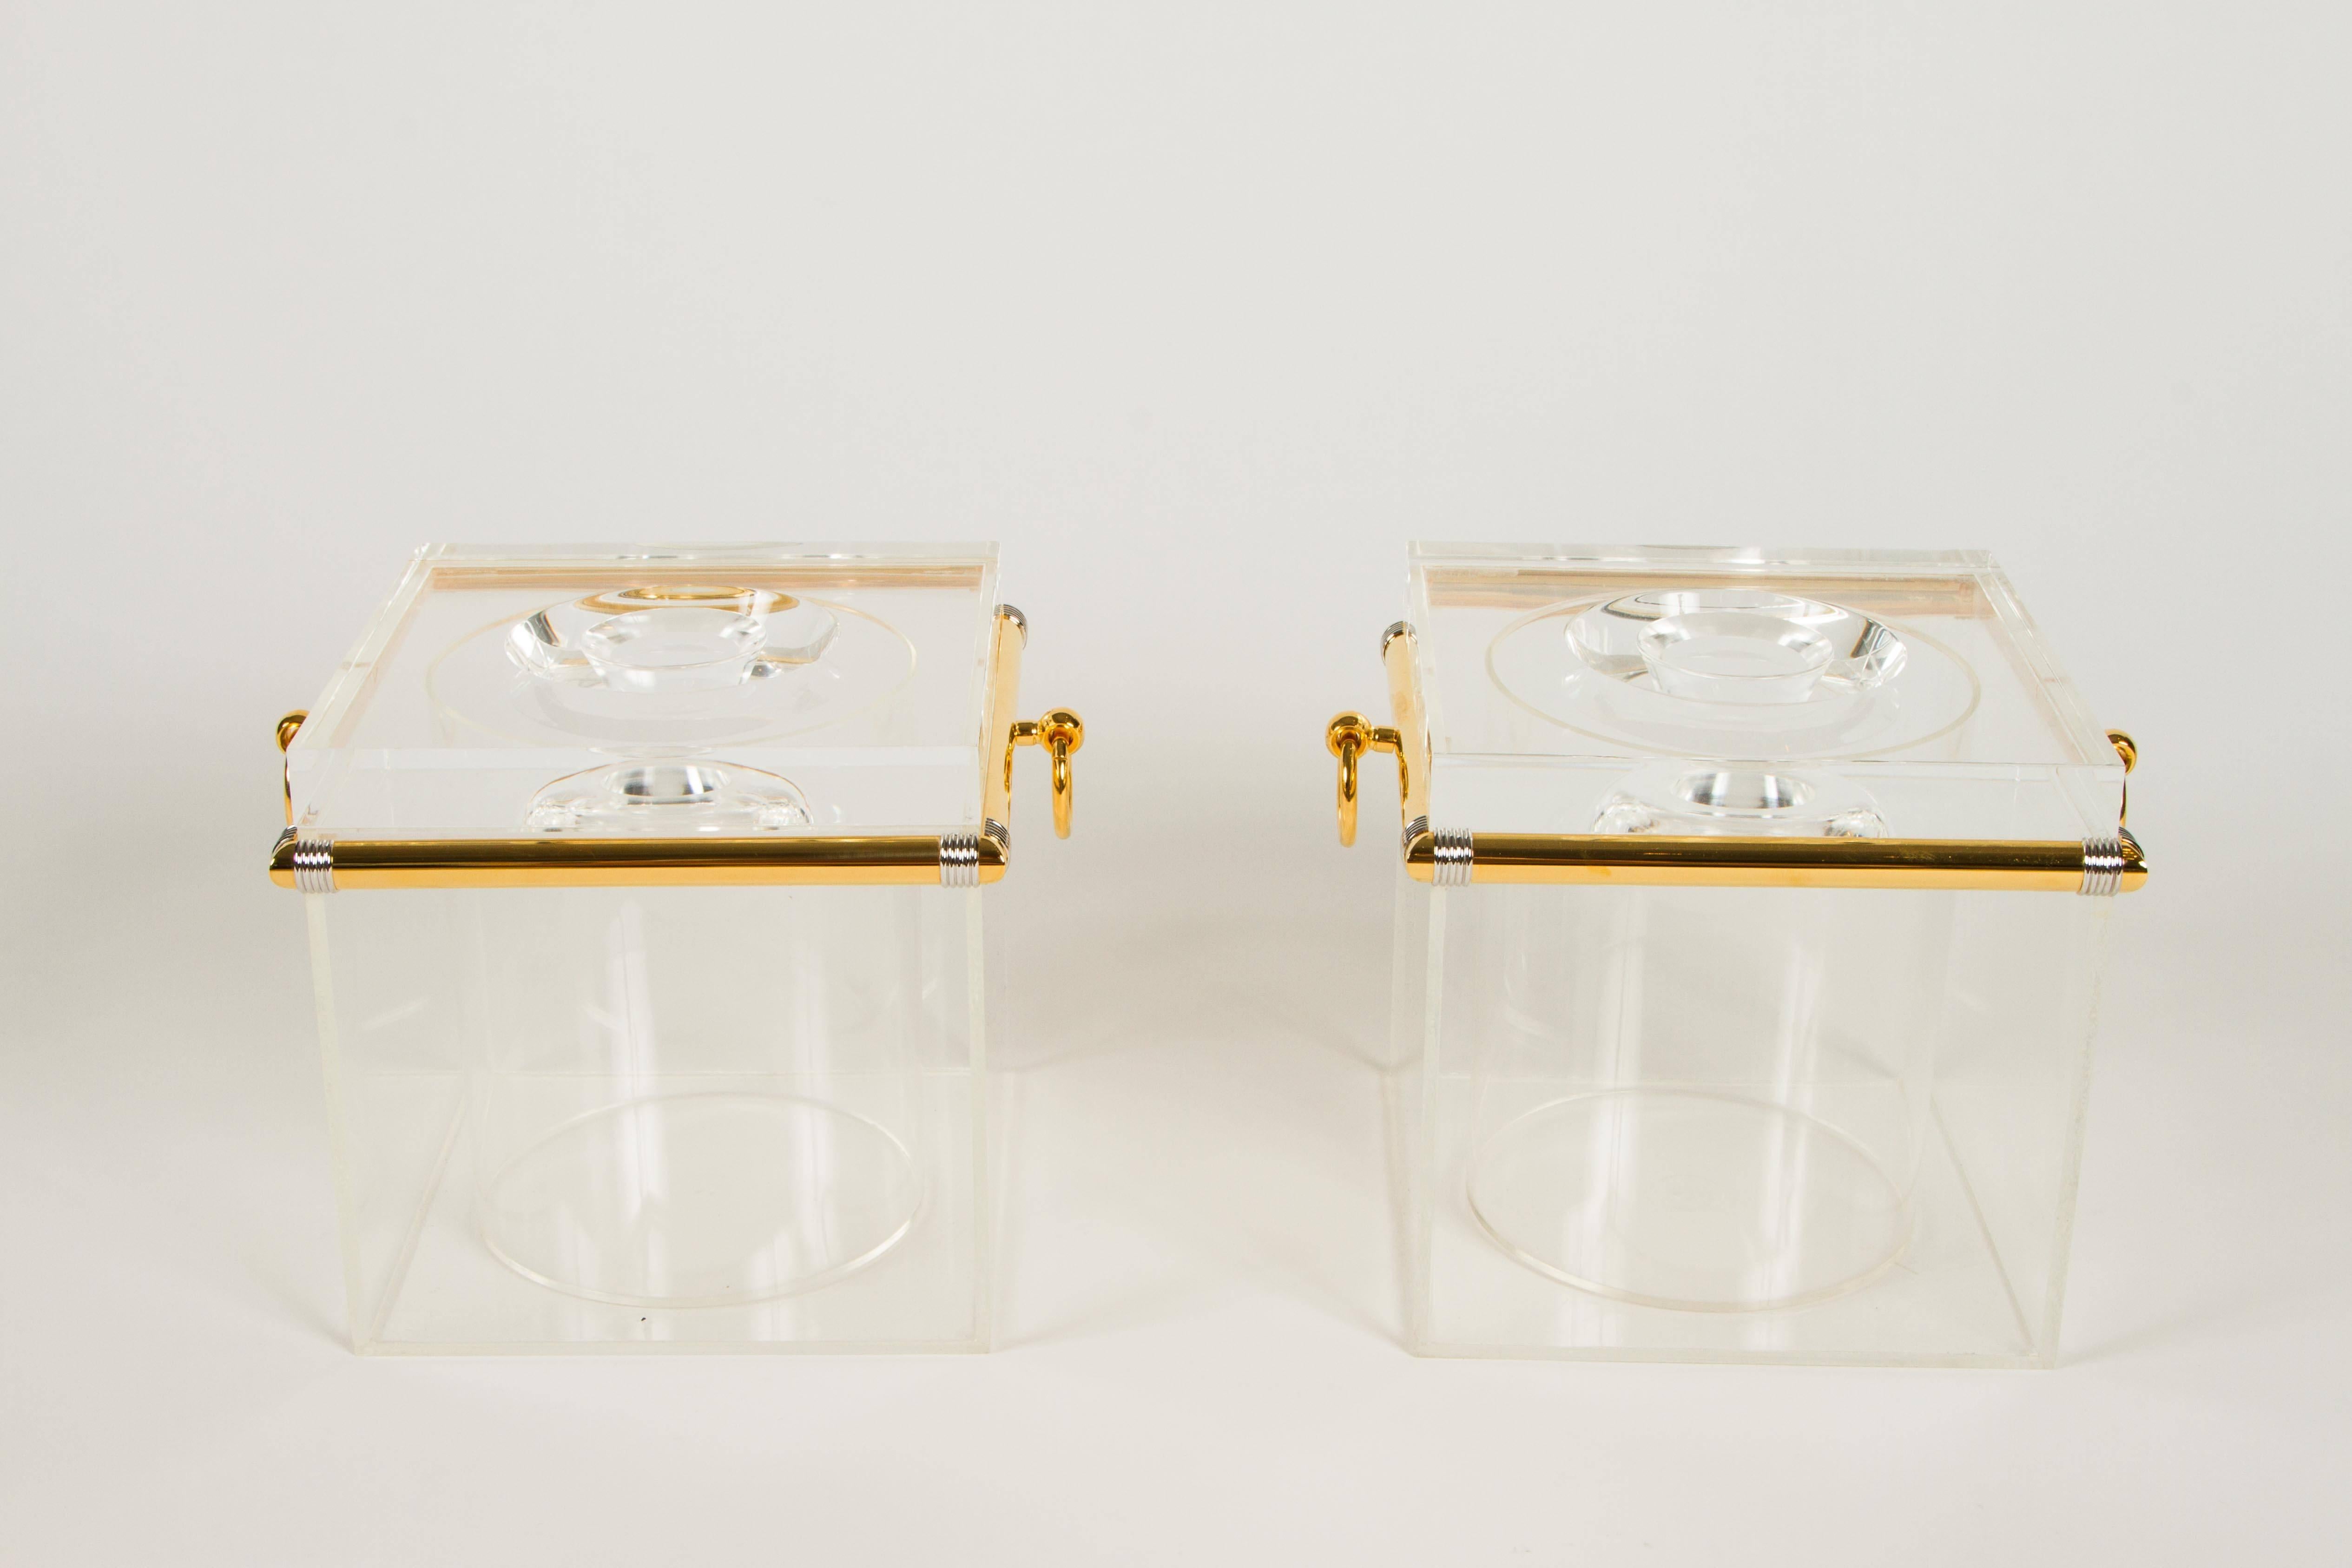 Uber chic pair of ice buckets no doubt of Italian origin. Fashioned from Lucite and finished with hardware in gold plate with contrast silver details at the corners. These buckets are high quality and totally stylish. There is on pair of gold plated